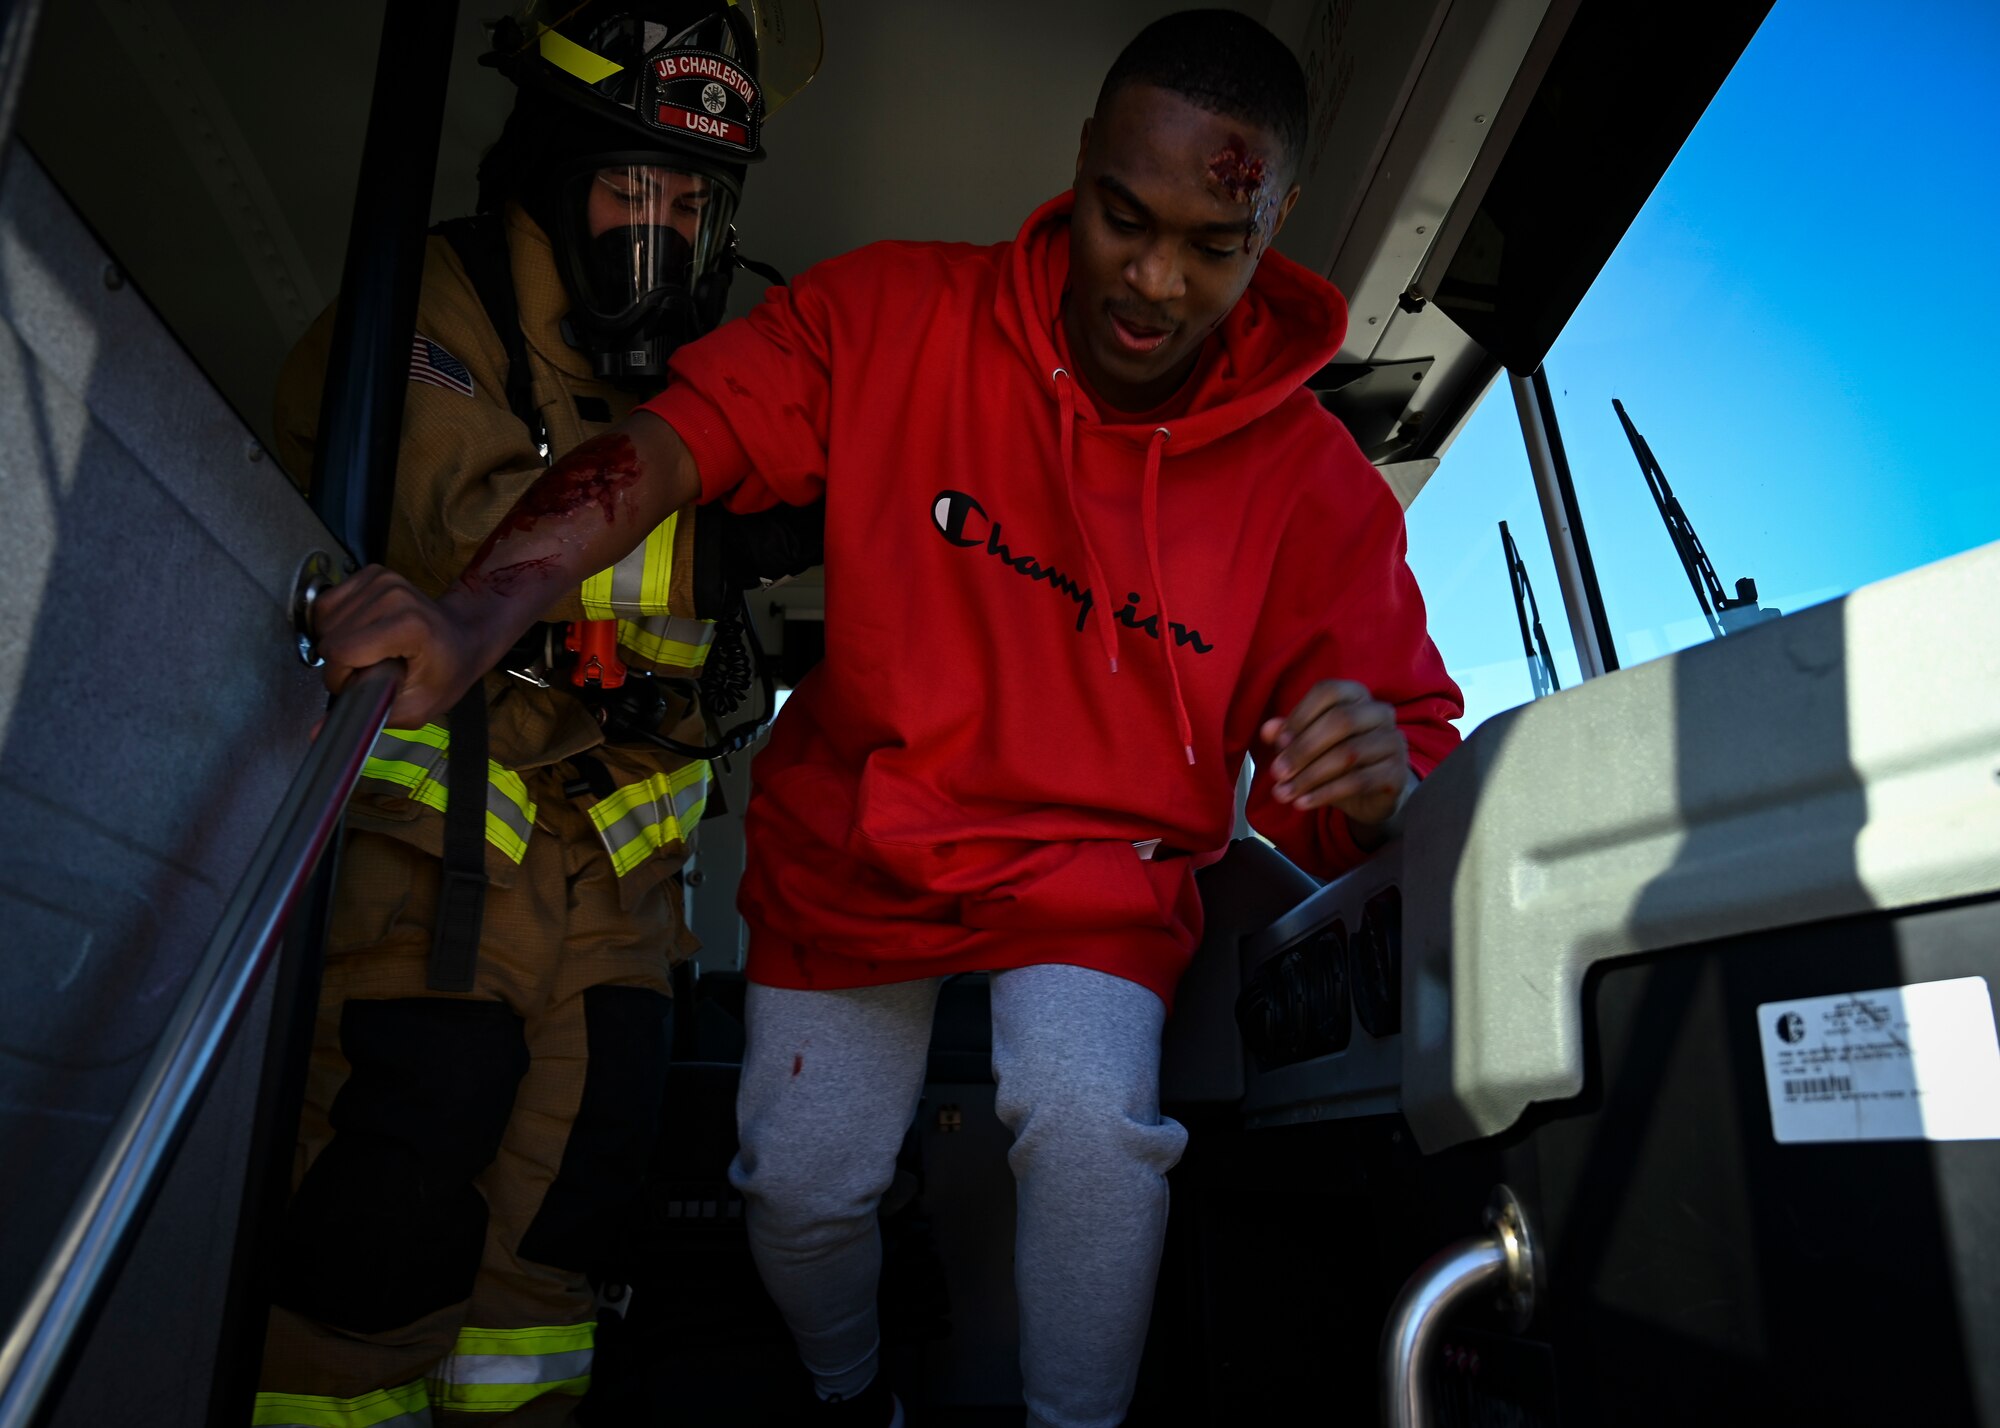 A volunteer is escorted off of a bus during a mass casualty exercise at Shaw Air Force Base, South Carolina, Jan. 19, 2022. The purpose of the exercise was to enhance and build on each agency's readiness capabilities for quick response emergencies. (U.S. Air Force photo by Senior Airman Madeline Herzog)